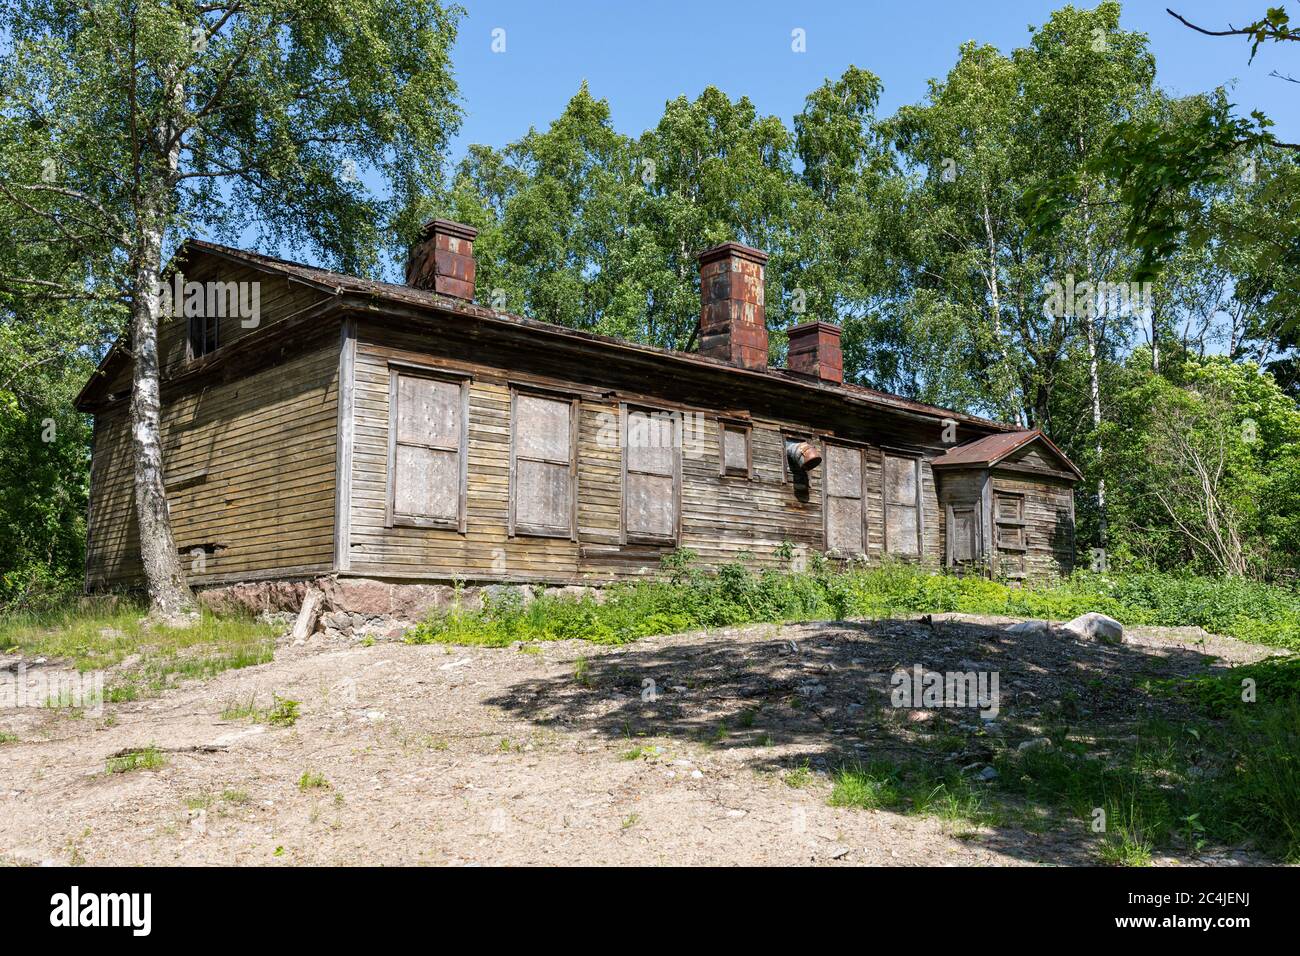 Dilapidated old wooden residential building in Vallisaari, former military island, now a day trip destination in archipelago of Helsinki, Finland Stock Photo